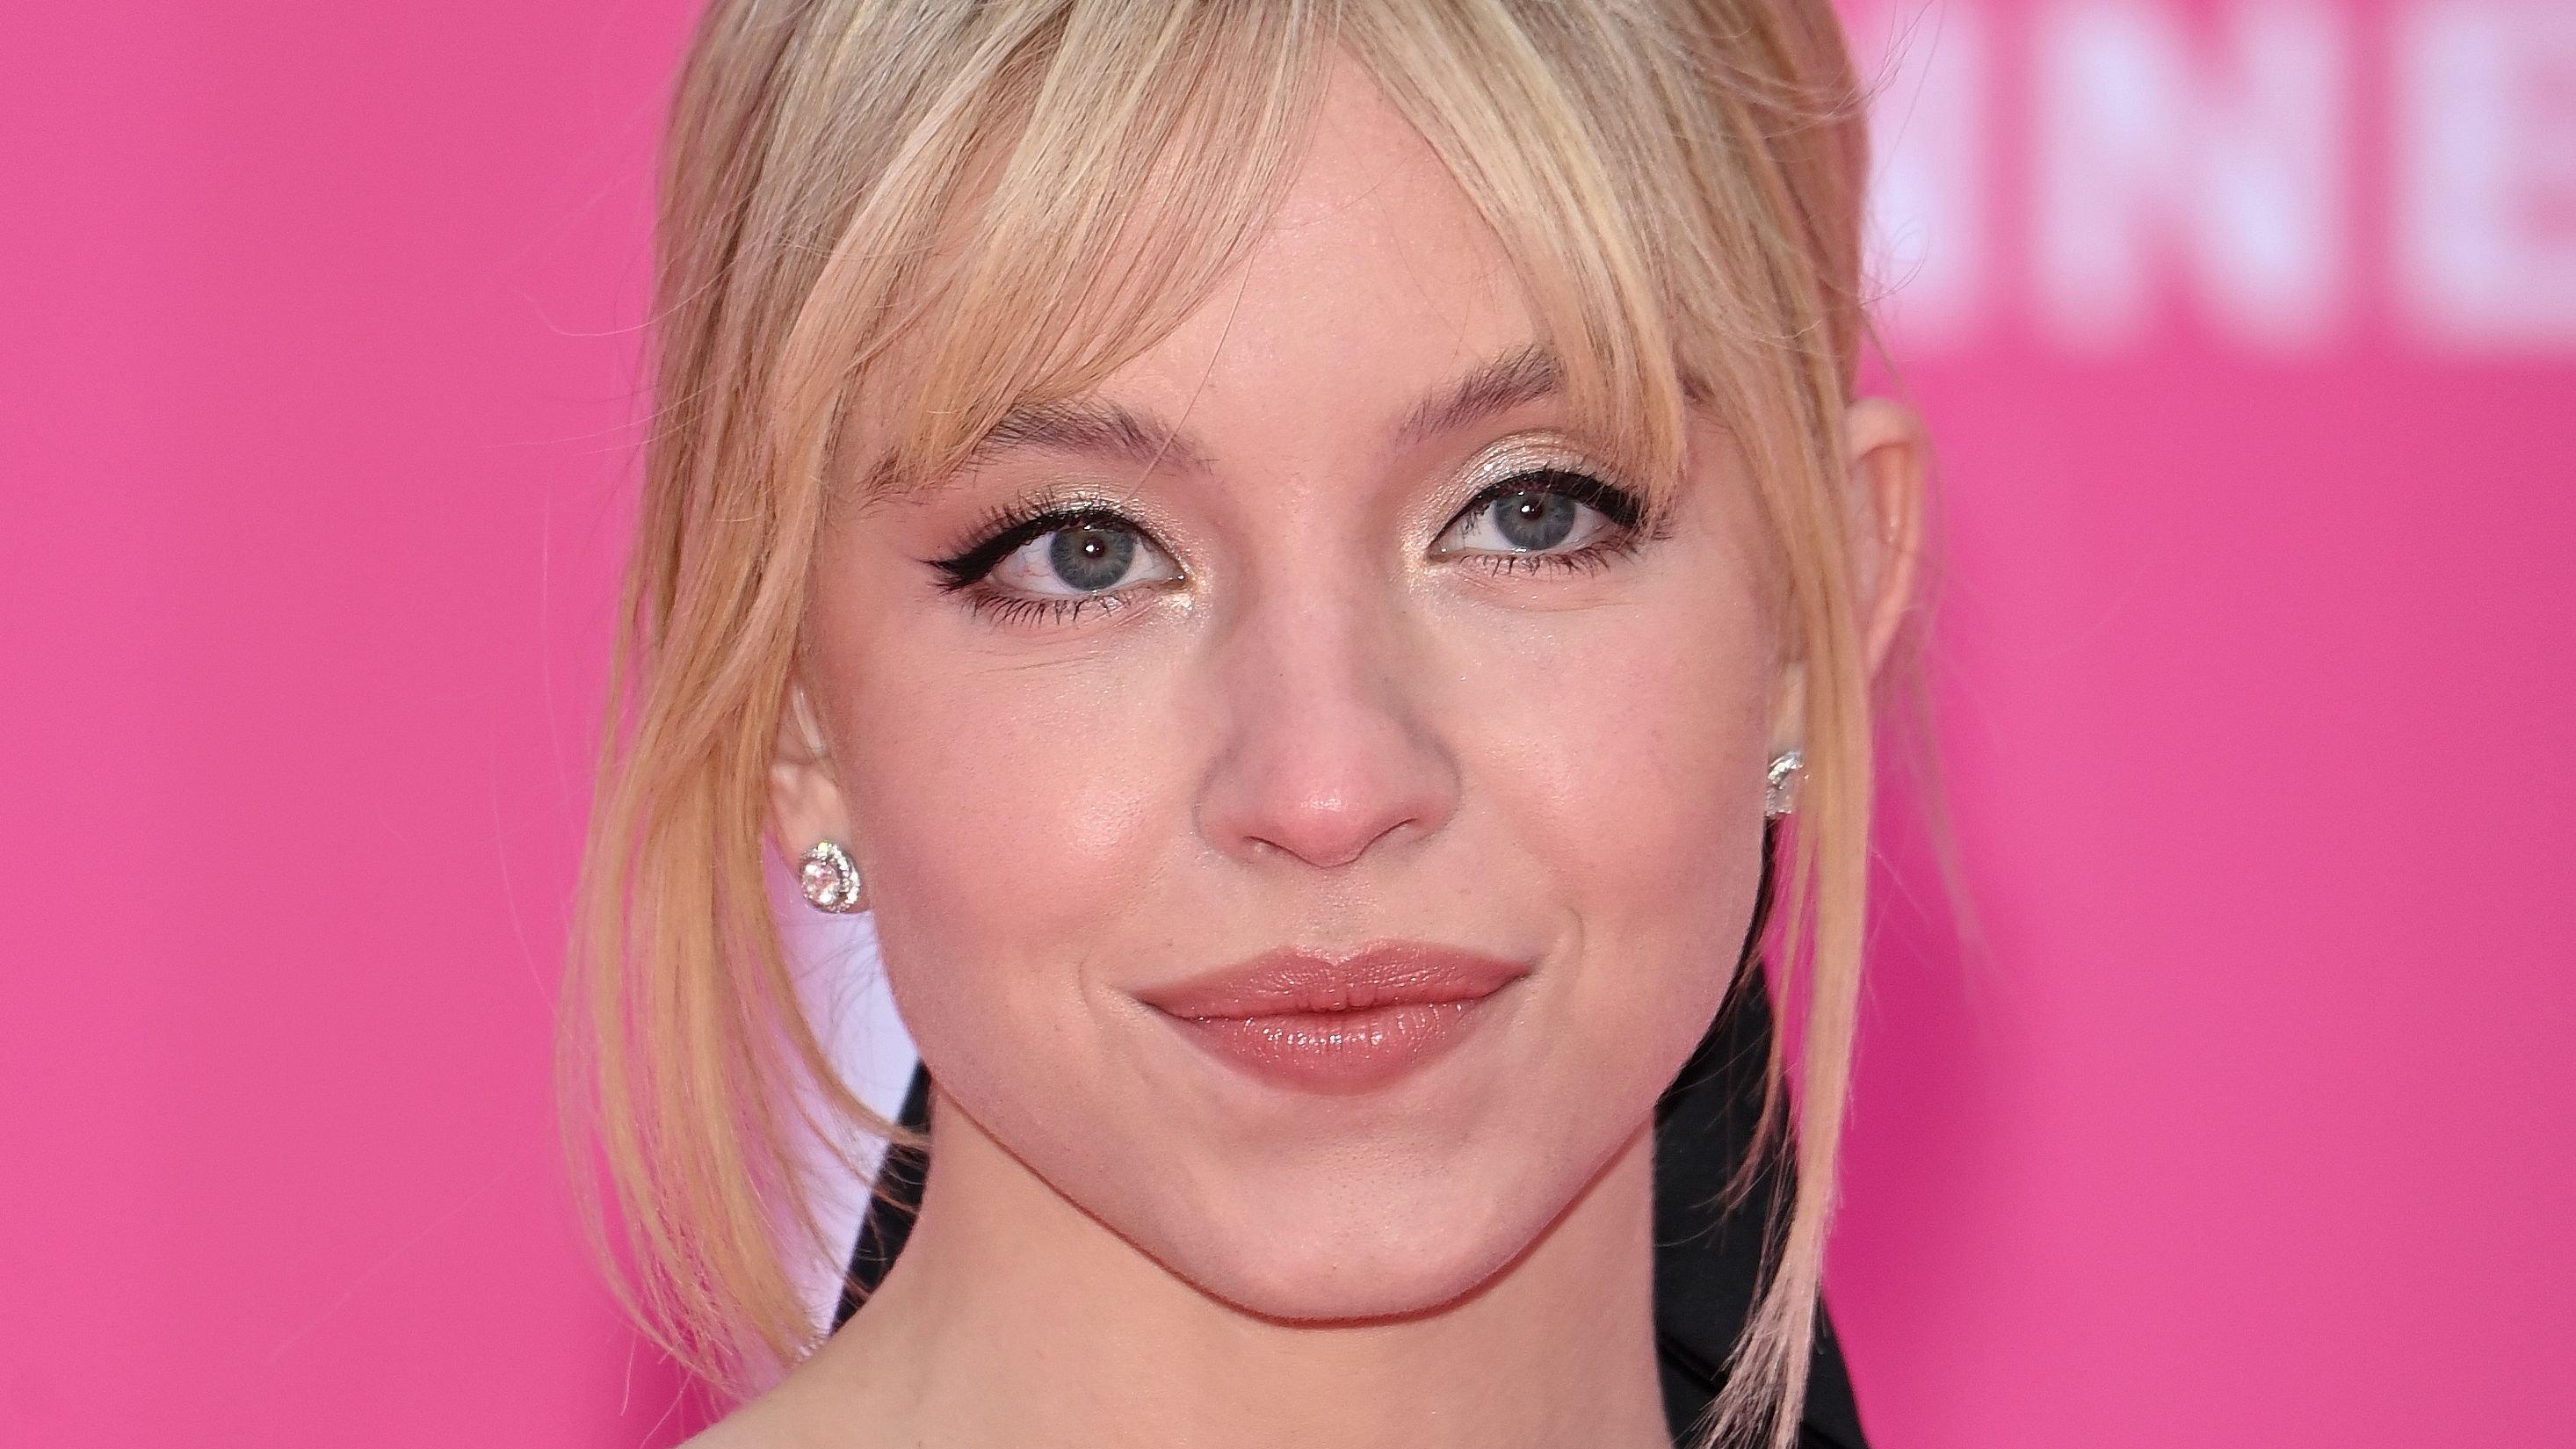 Sydney Sweeney sporting curtain bangs on a red carpet event.